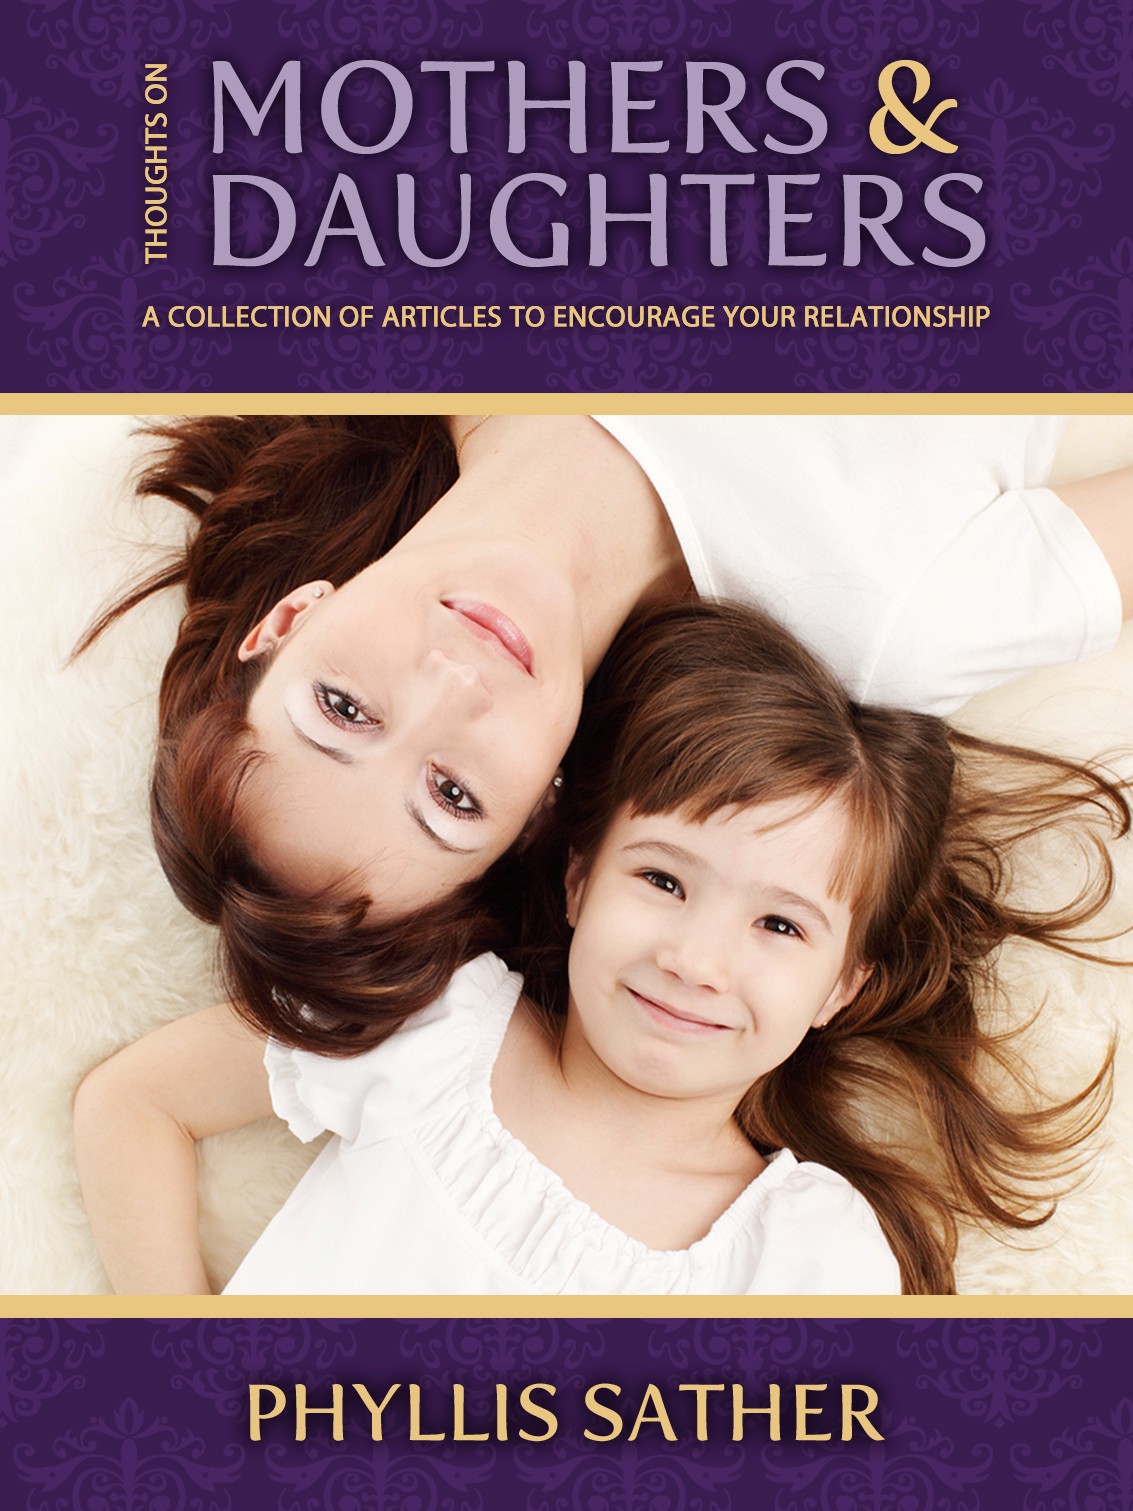 Thoughts-on-Mothers-Daughters